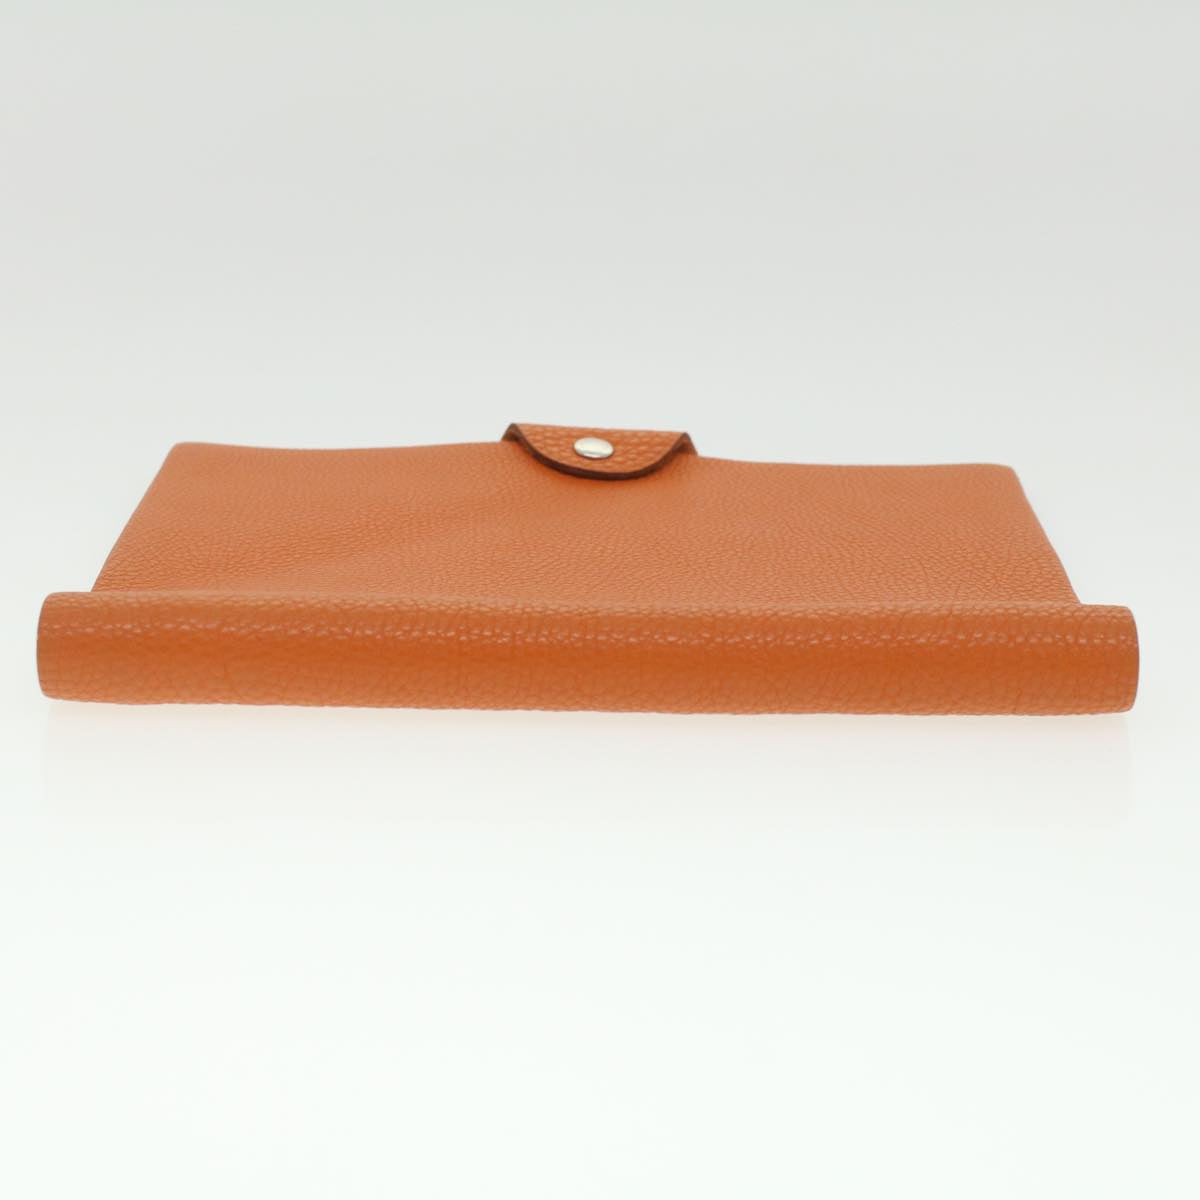 HERMES Yuris MM Note Cover Leather Orange Auth th3439